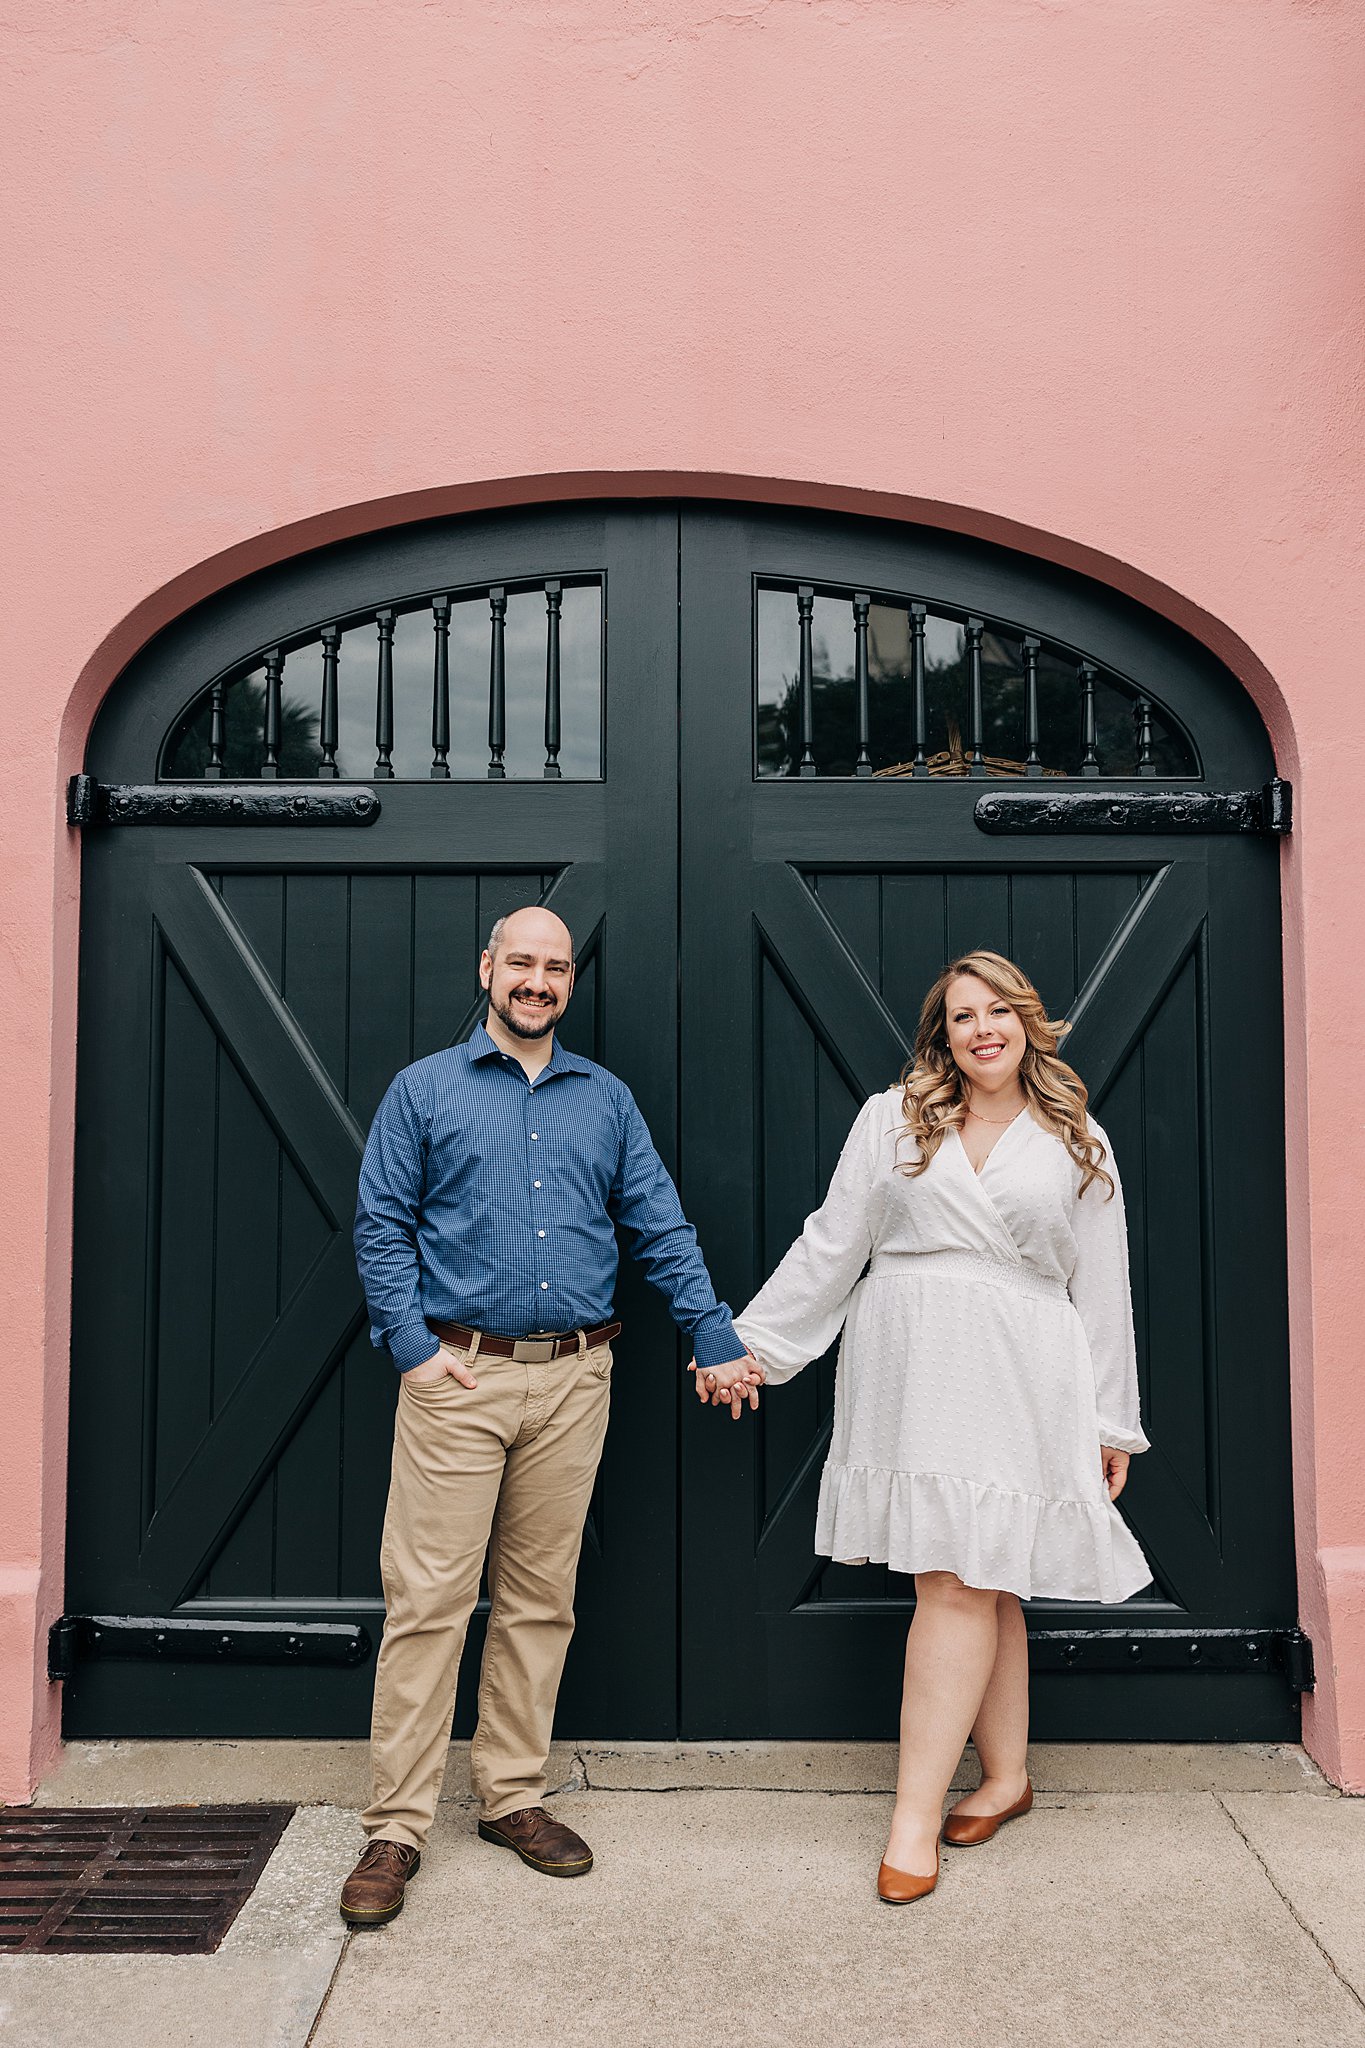 A newly engaged couple hold hands in a large wooden doorway of a pink building